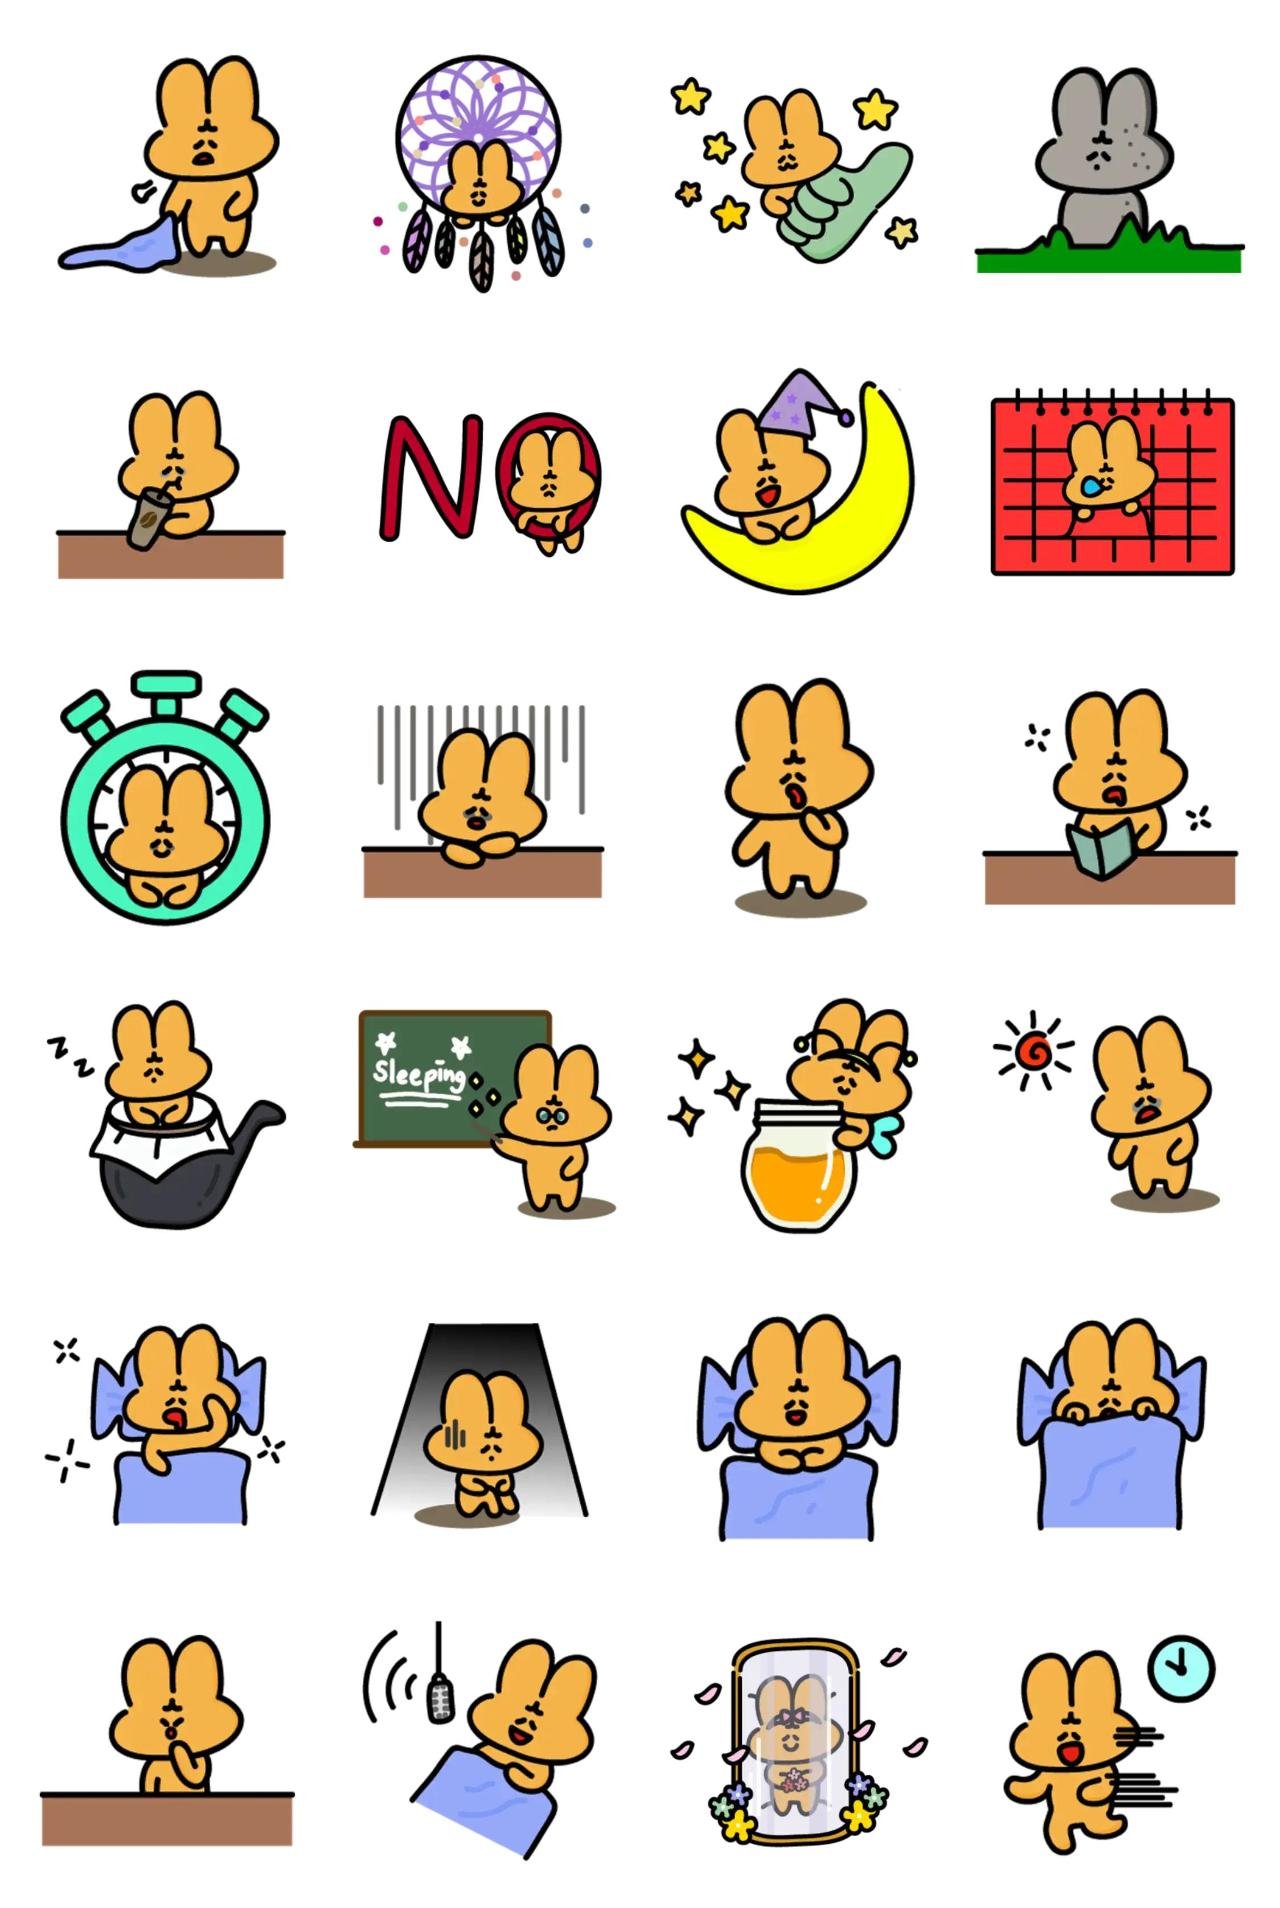 Tired Rabbit Animals sticker pack for Whatsapp, Telegram, Signal, and others chatting and message apps